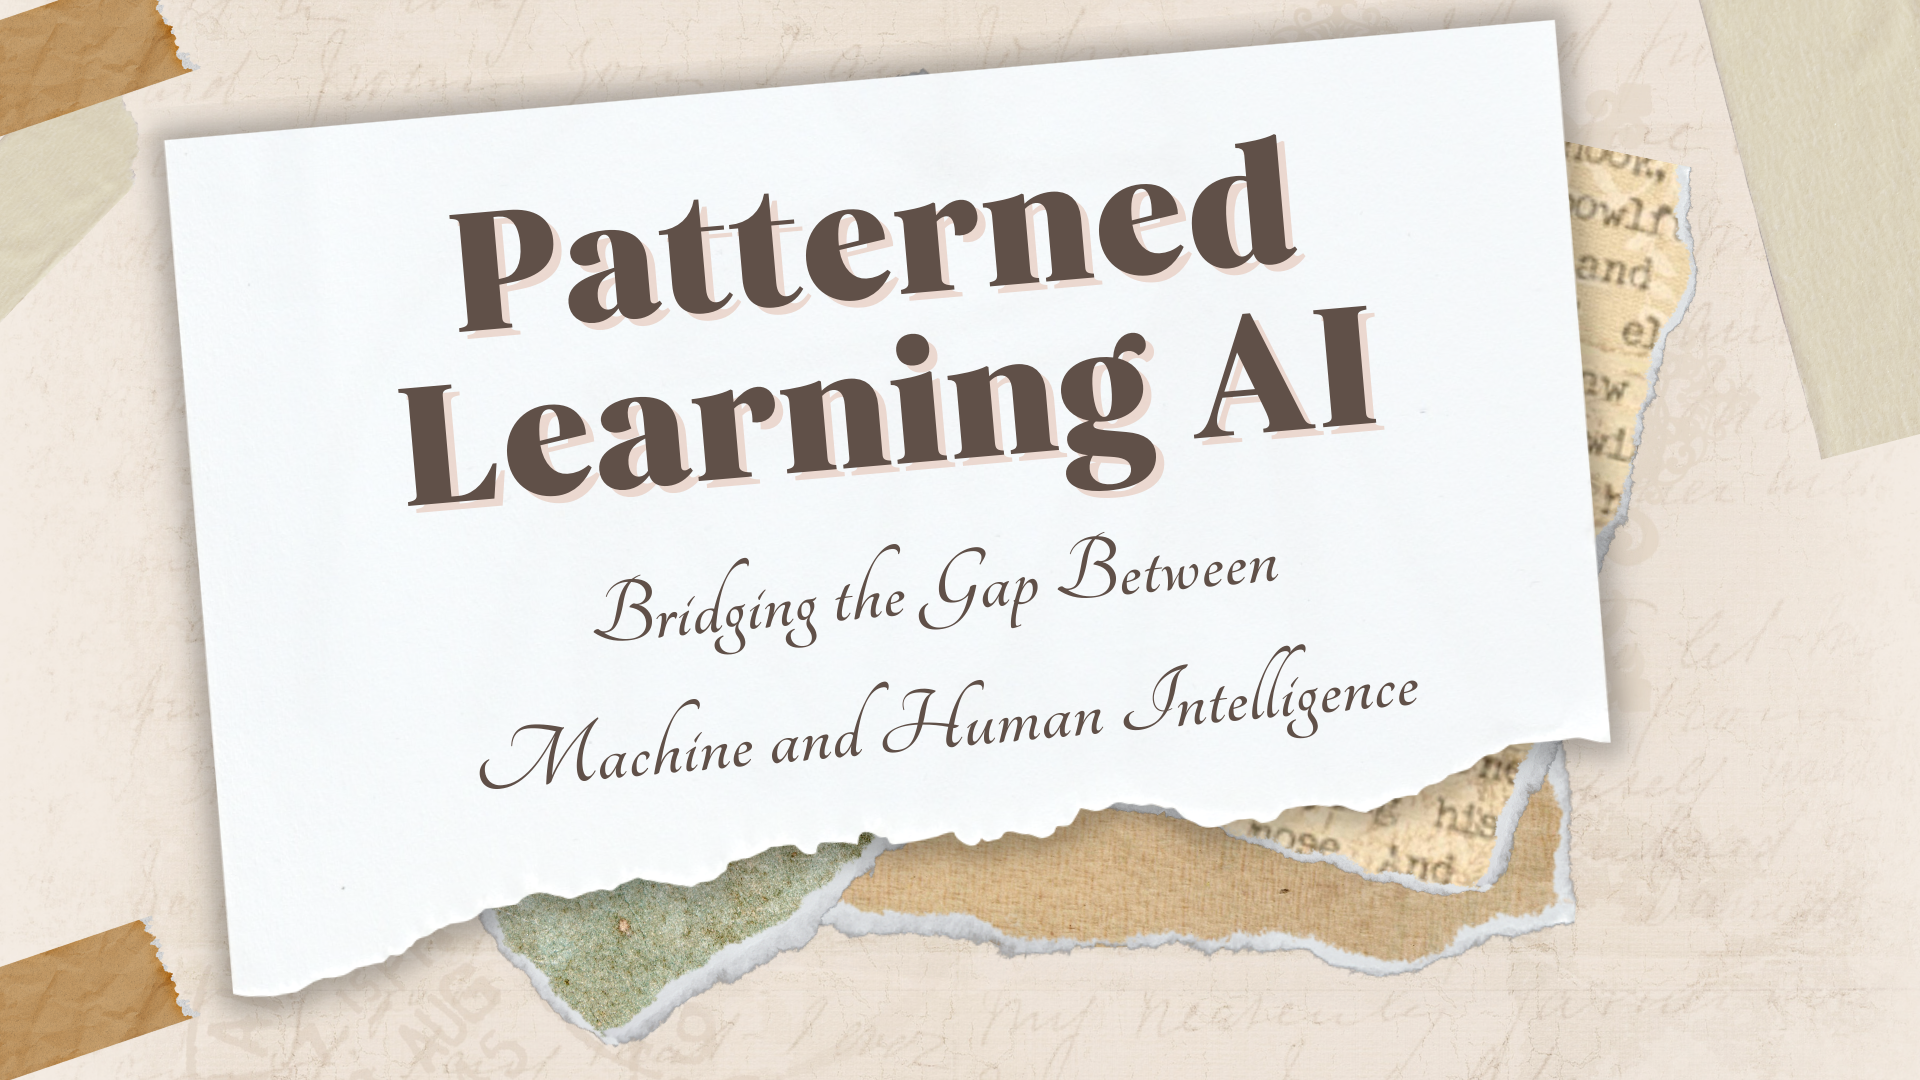 Cover Image for Patterned Learning AI: Bridging the Gap Between Machine and Human Intelligence